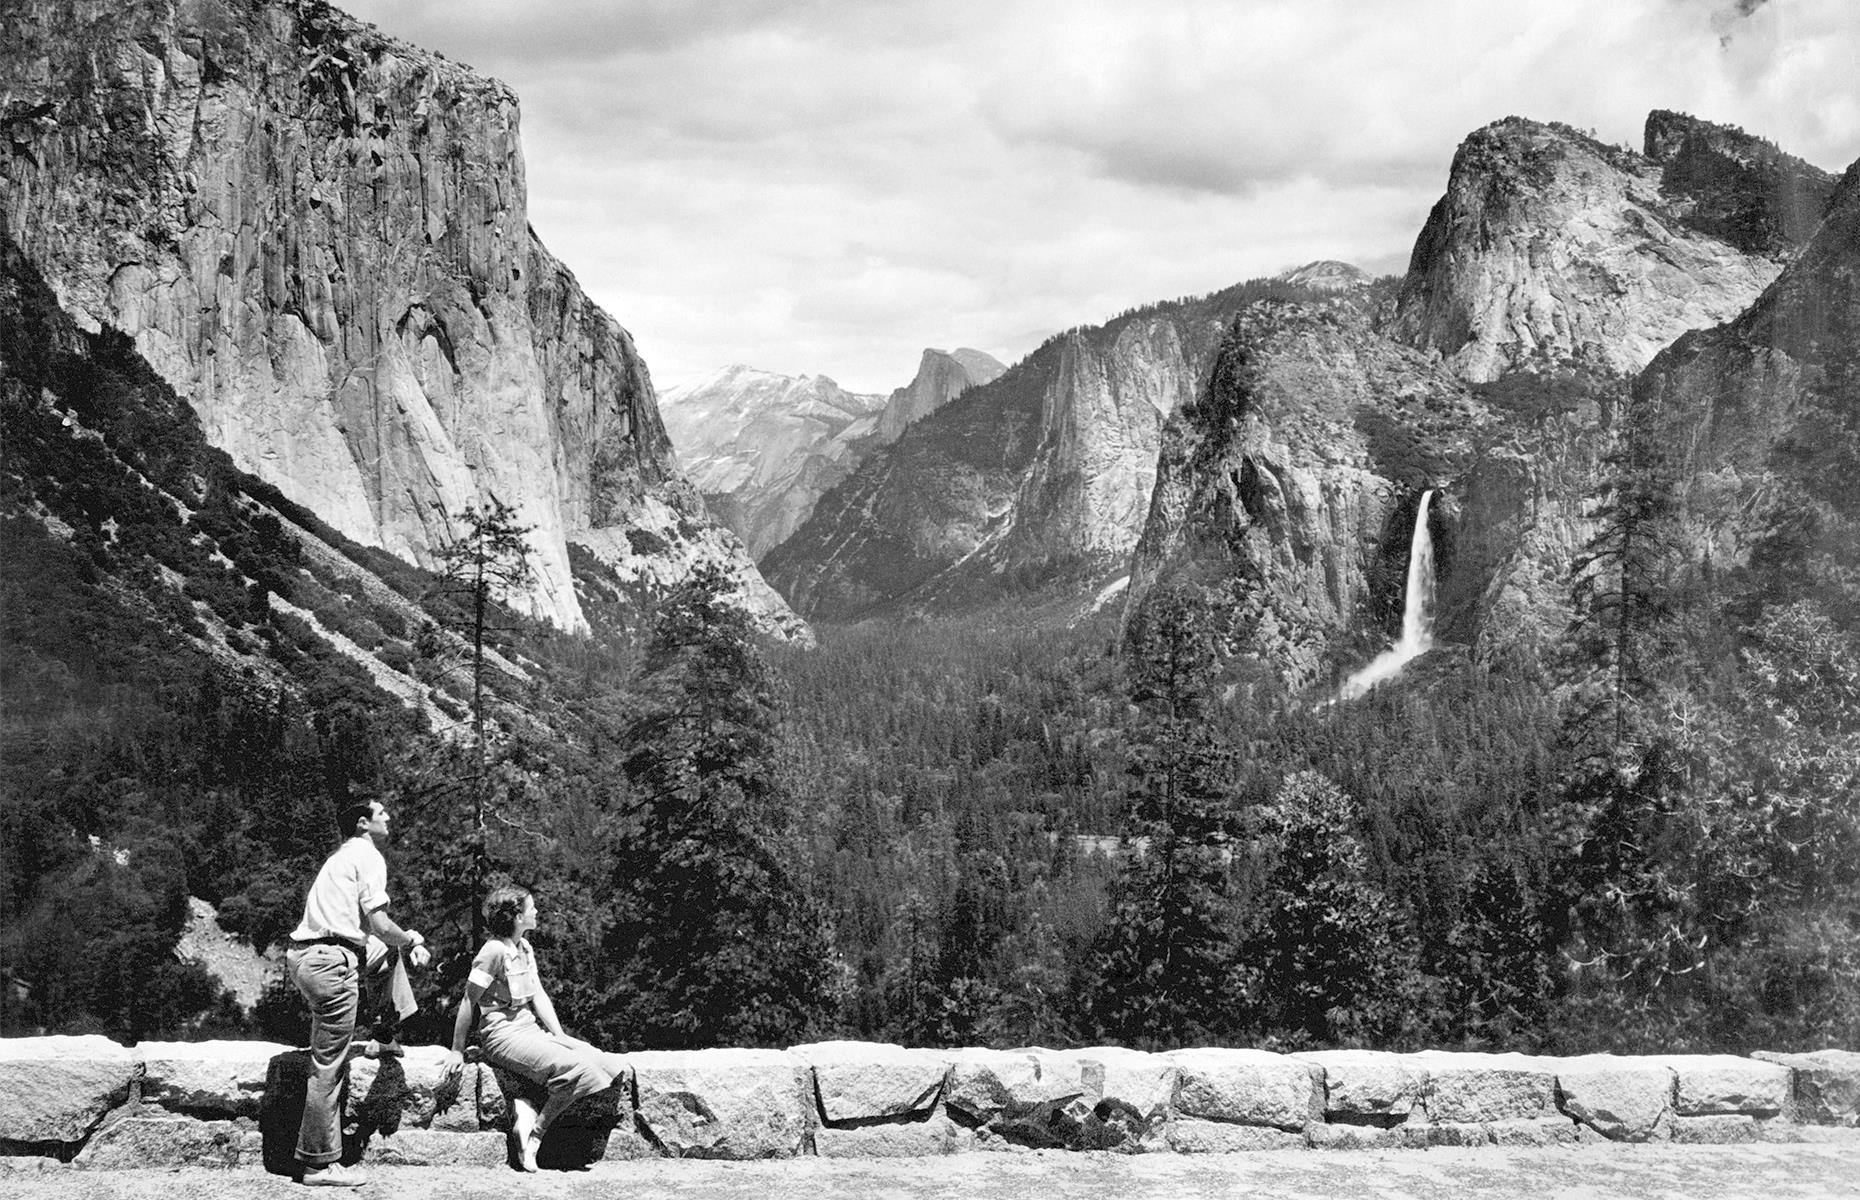 <p>This nostalgic photograph snaps another pair of national park road-trippers. Taken in 1938, it captures a young couple off California State Route 41 in Yosemite National Park. The 620-foot (189m) Bridalveil Fall thunders down in the background. </p>  <p><a href="https://www.loveexploring.com/galleries/94956/what-family-holidays-looked-like-the-decade-you-were-born?page=1"><strong>Now see what family vacations looked like the decade you were born</strong></a></p>